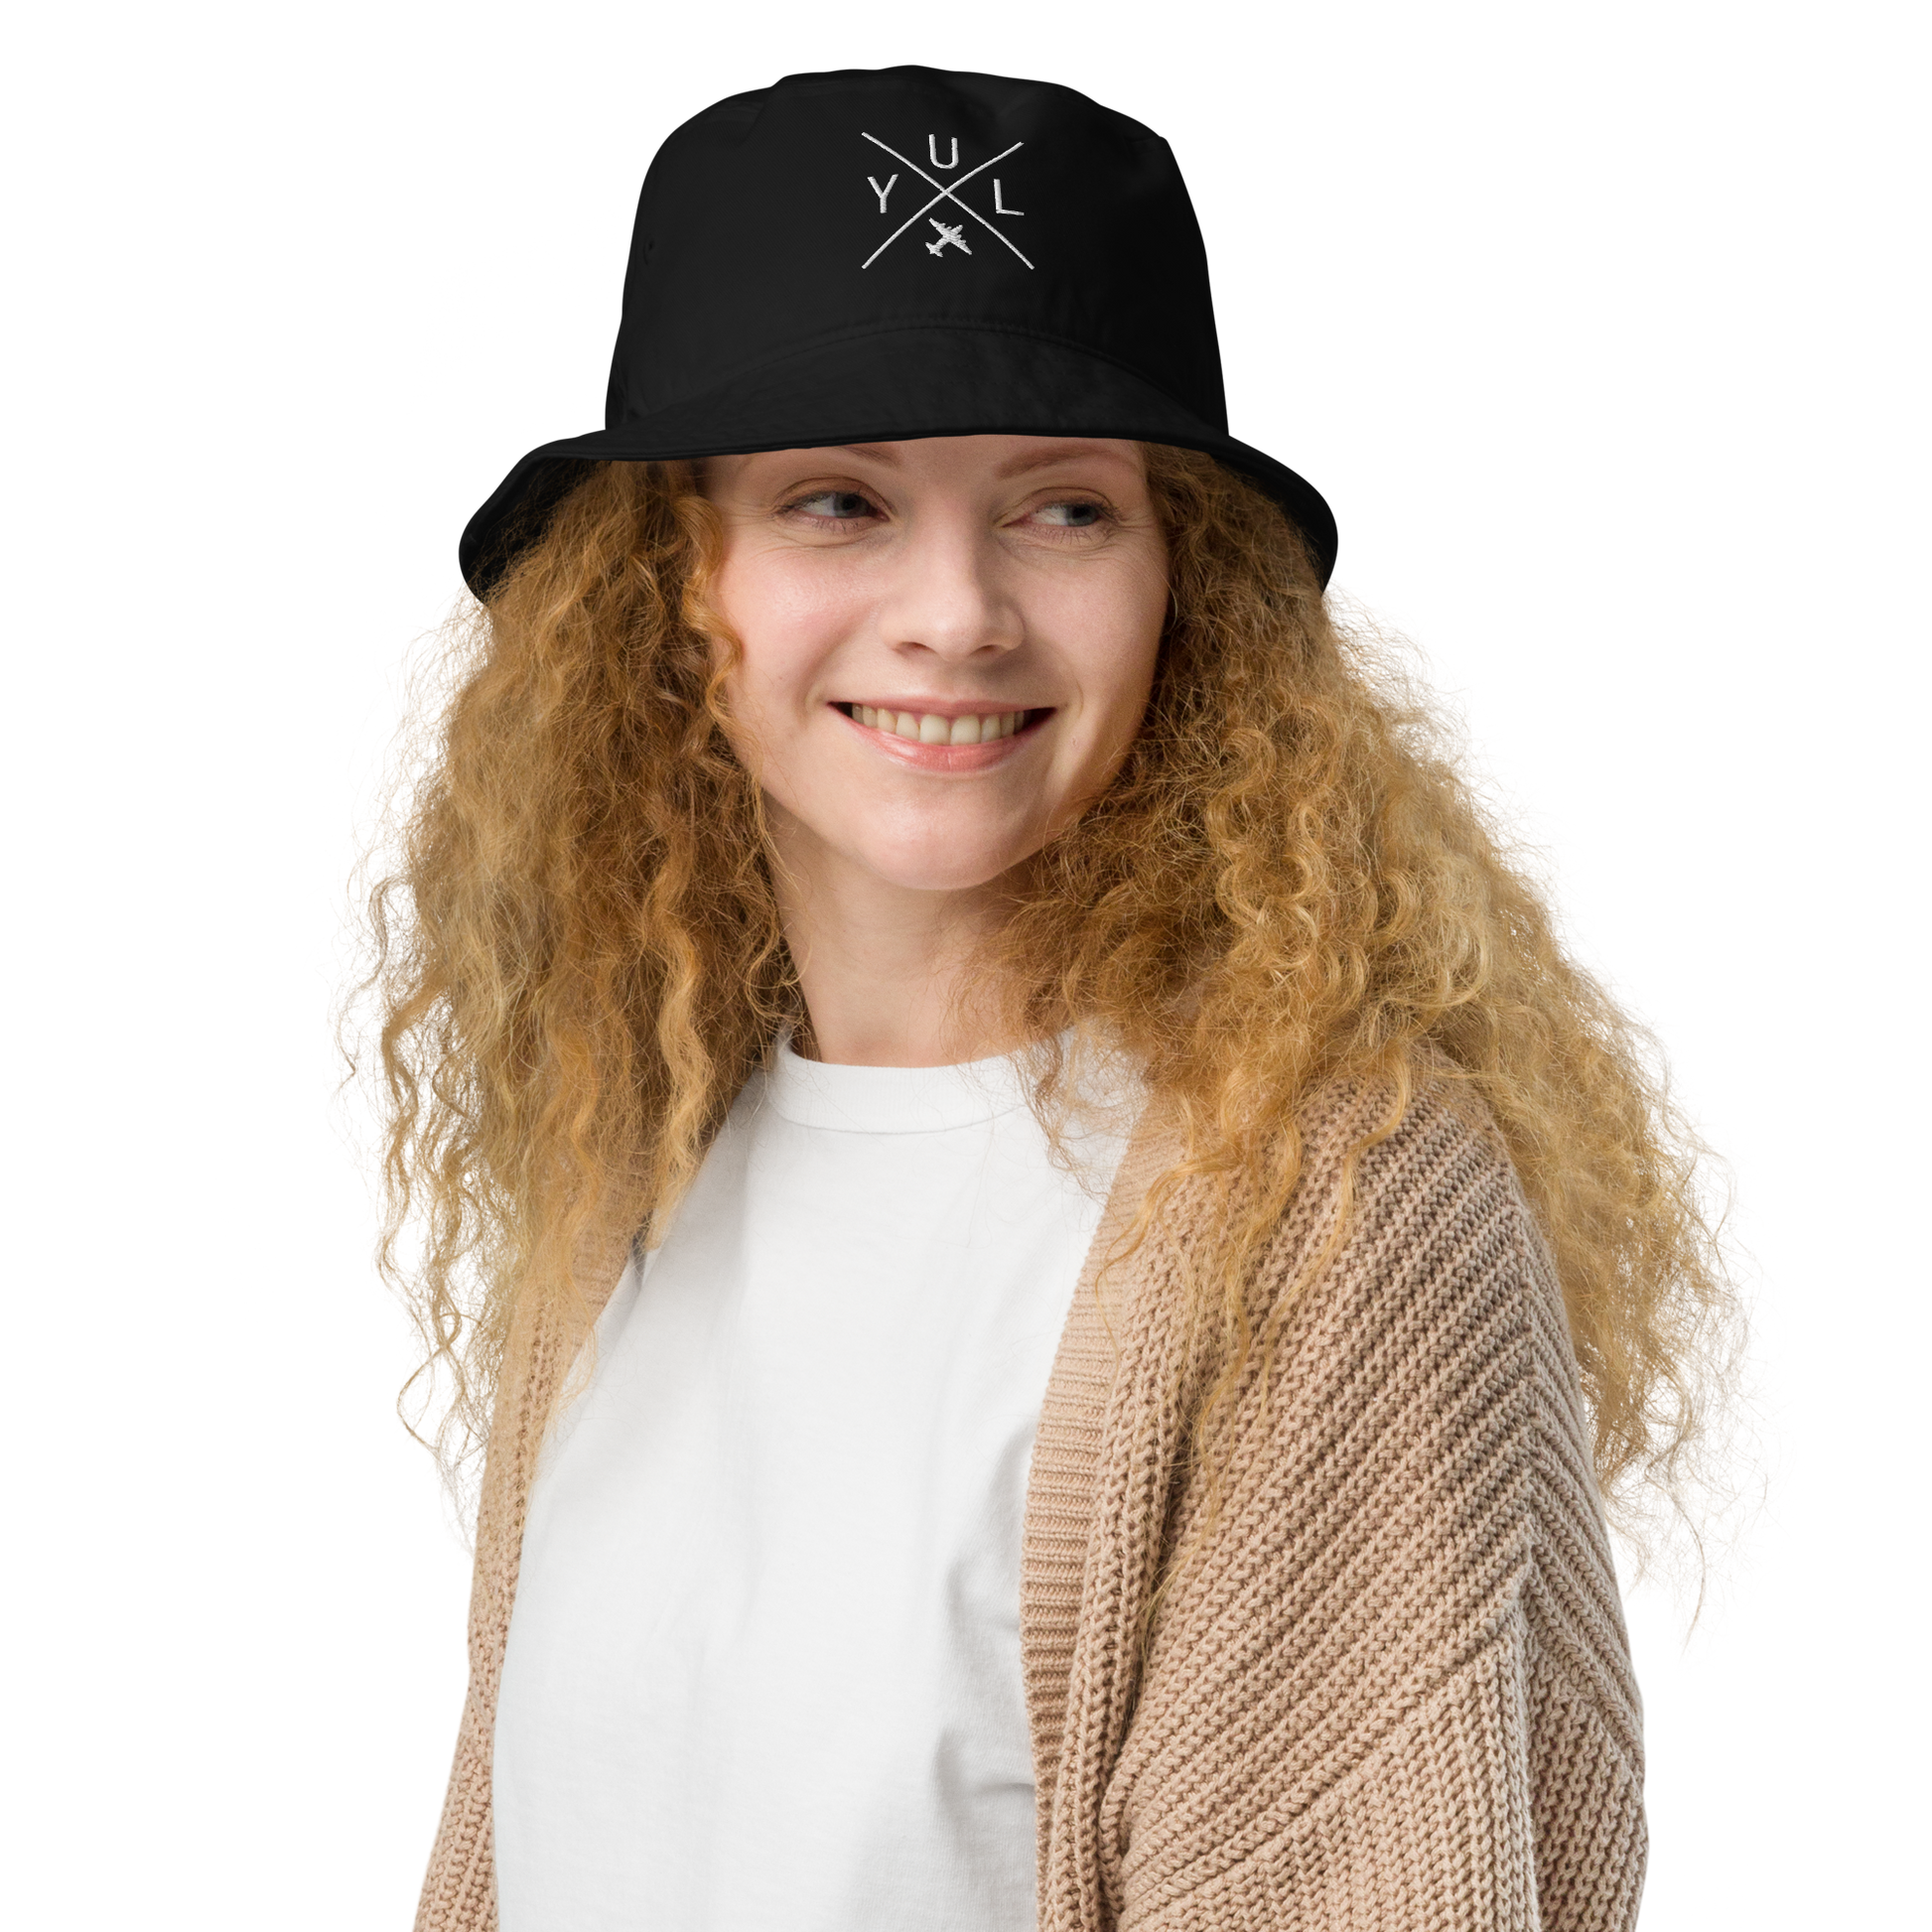 YHM Designs - YUL Montreal Organic Cotton Bucket Hat - Crossed-X Design with Airport Code and Vintage Propliner - White Embroidery - Image 04